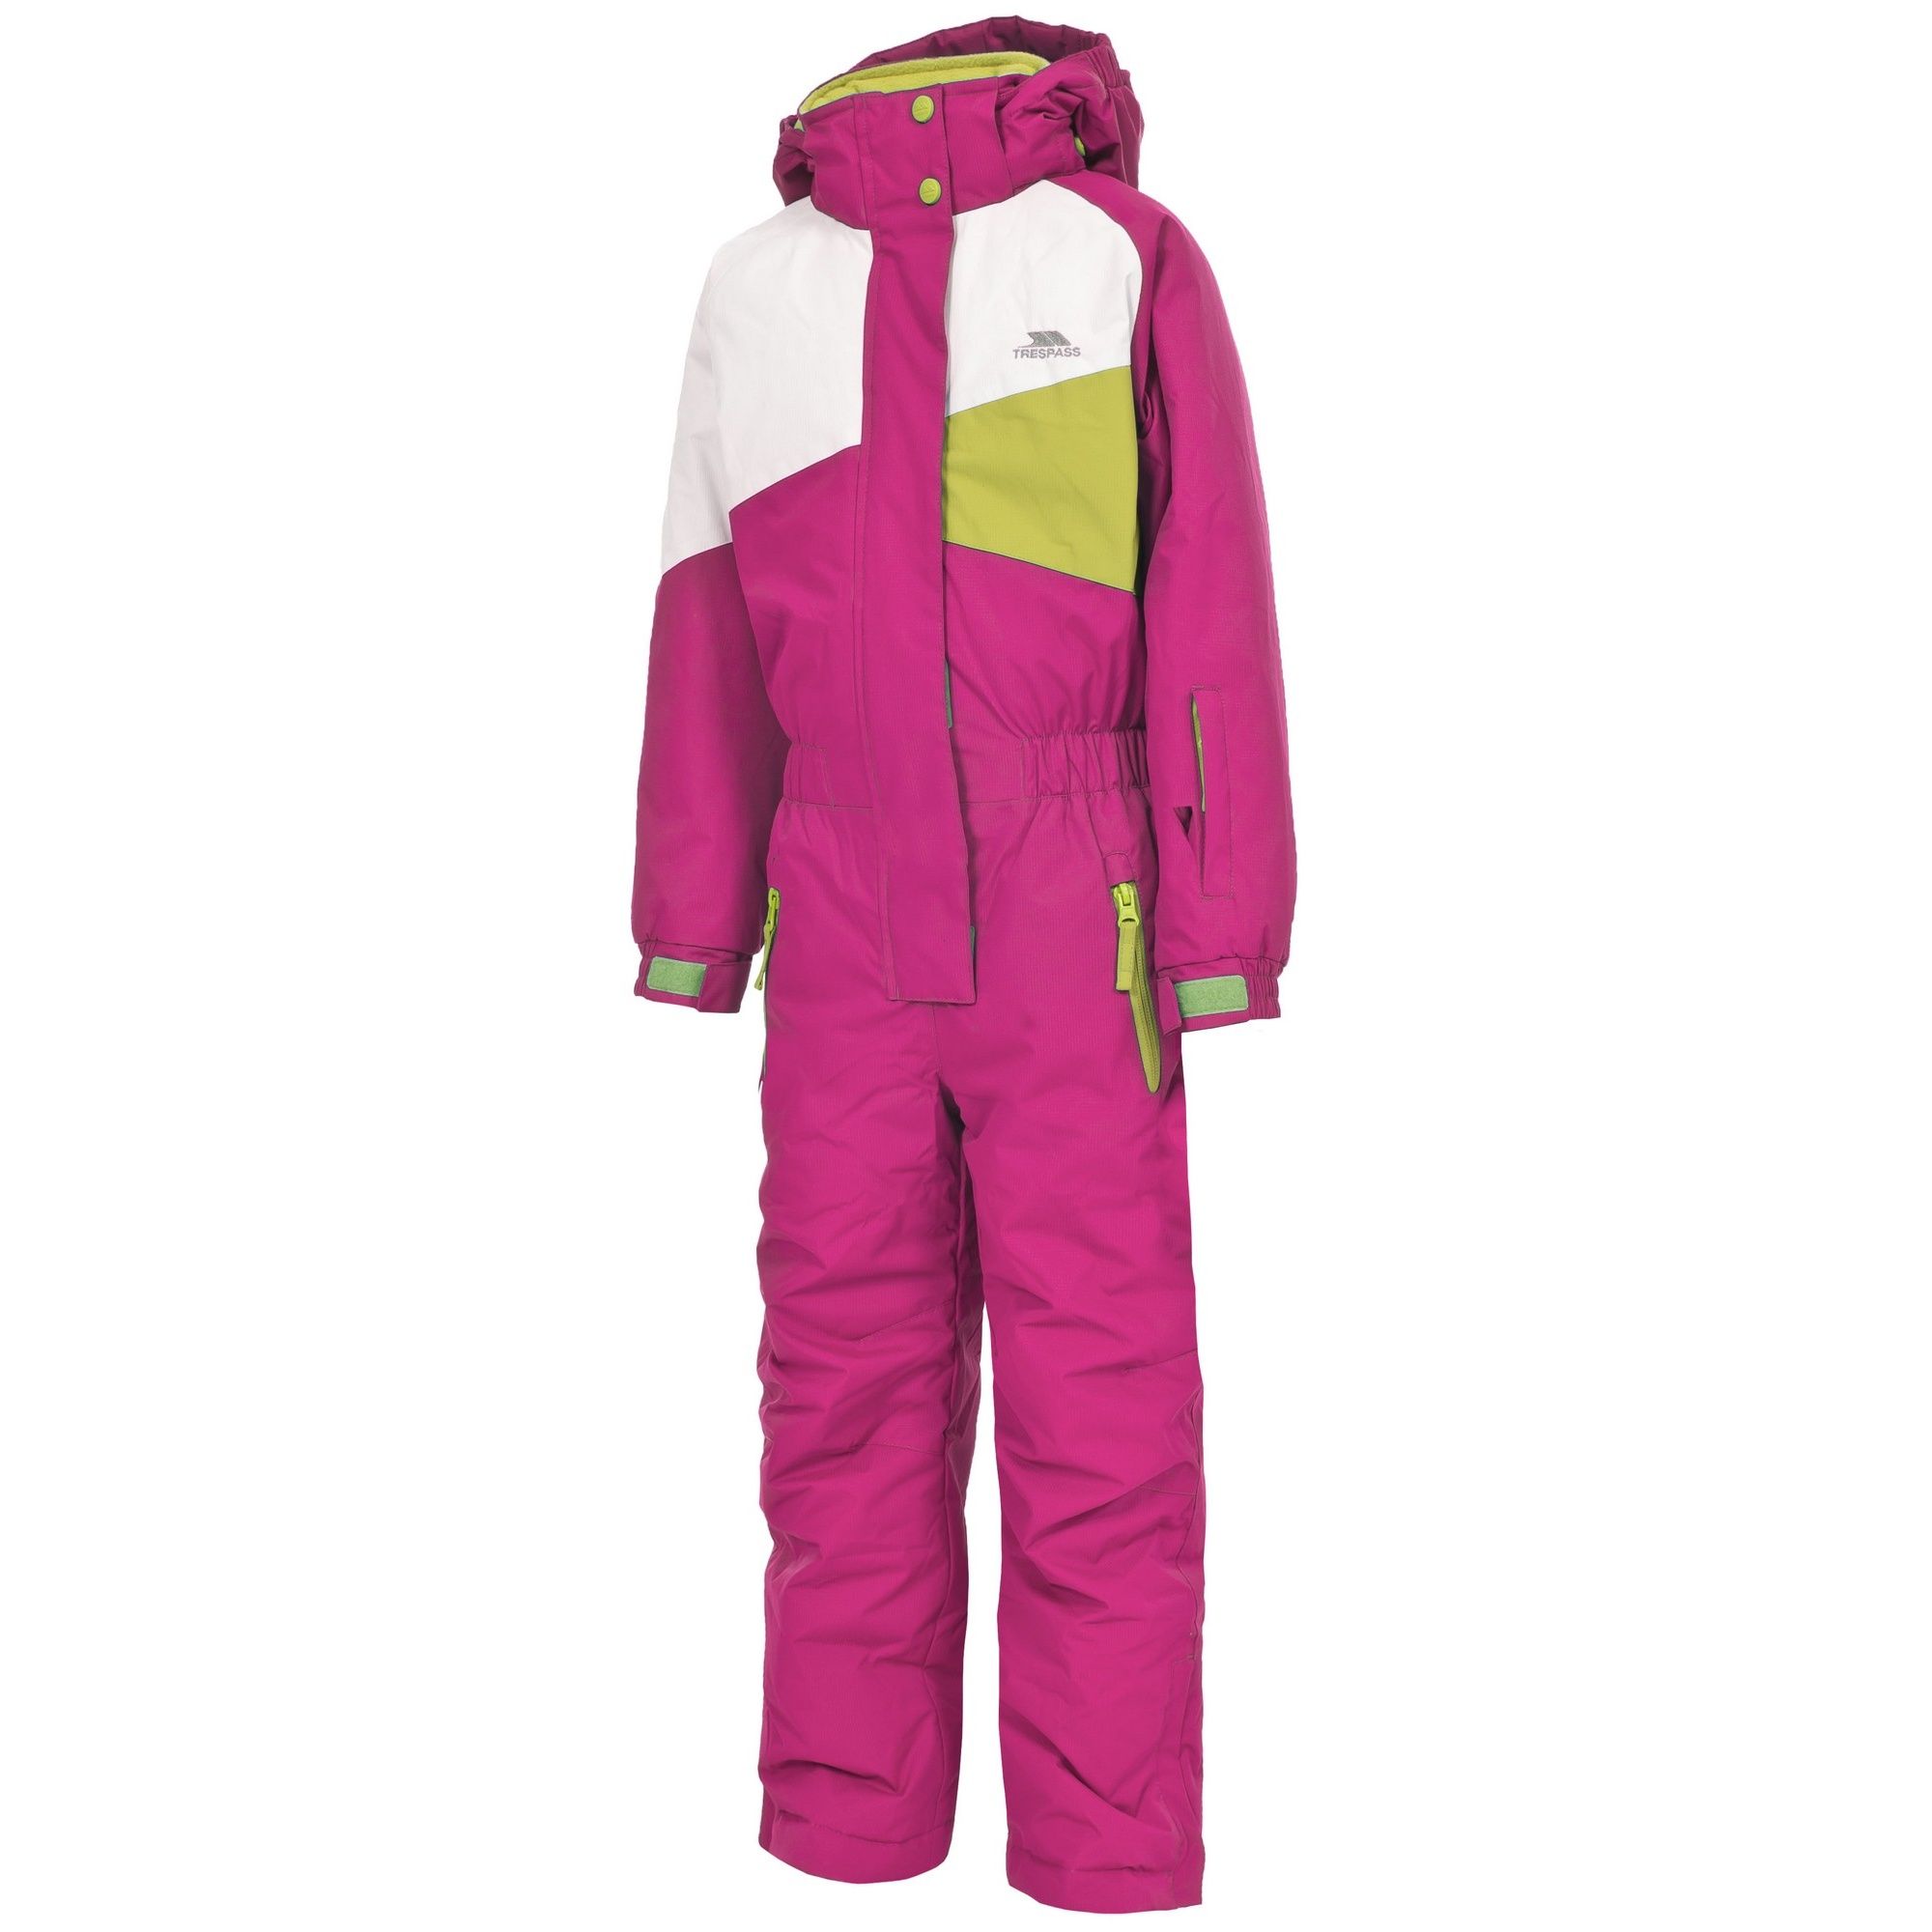 Padded one piece ski suit. 2 zip pockets. D-ring inside pocket. Side leg ankle zippers. Ankle gaiters. Elasticated waist. Detachable stud off hood. Water resistant. Windproof. Critical taped seams. Shell: 100% Polyester PVC coating, Lining: 100% Polyester, Padding: 100% Polyester.